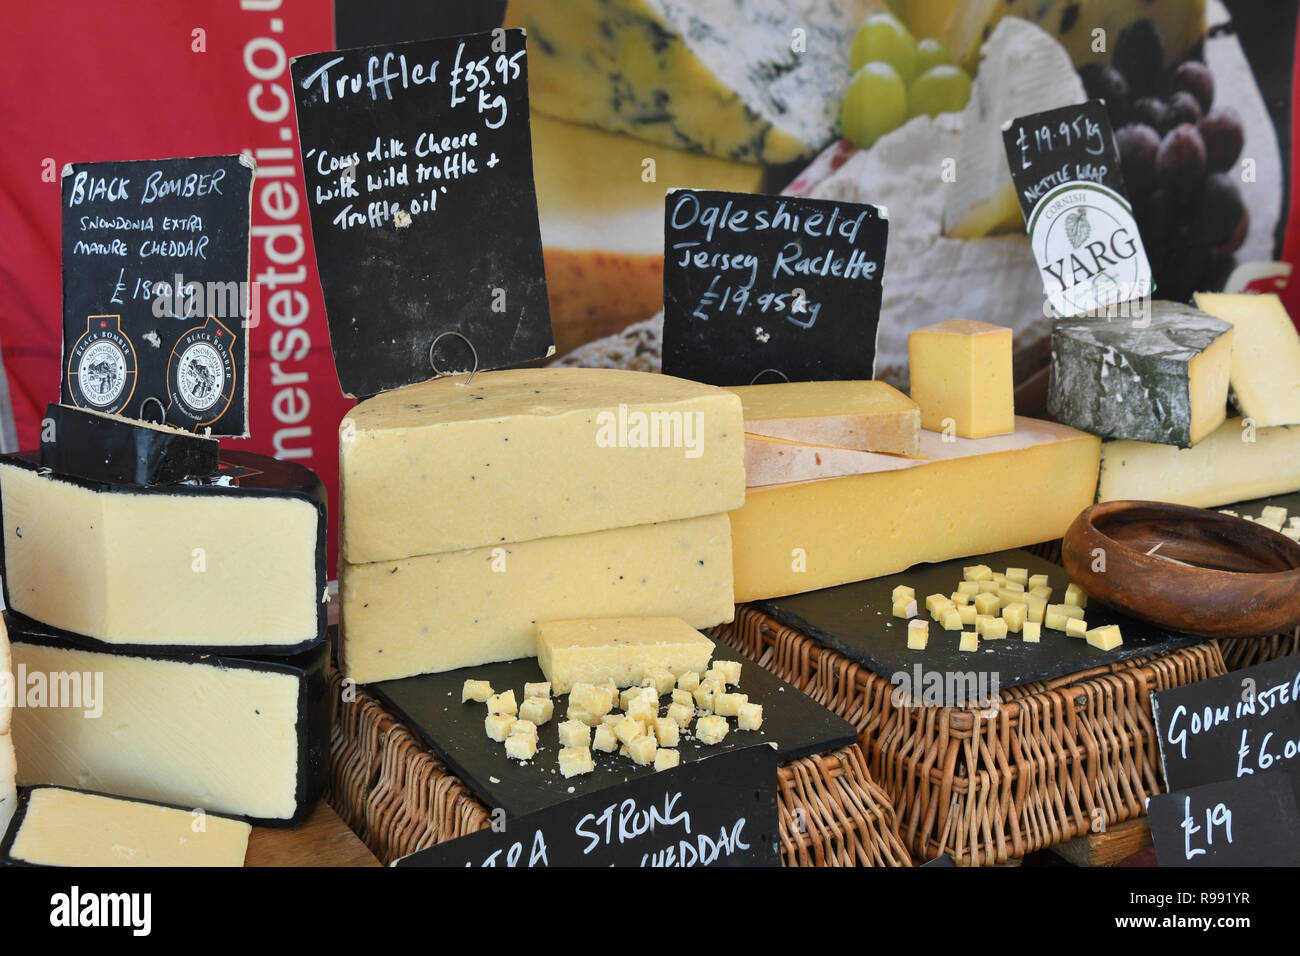 Cheeses on market stall in Somerset displayed with samples for tasting. Black BomberCheddar,Truffles,Ogleshield Jersey,Cornish Yarg nettle Wrapped,UK Stock Photo